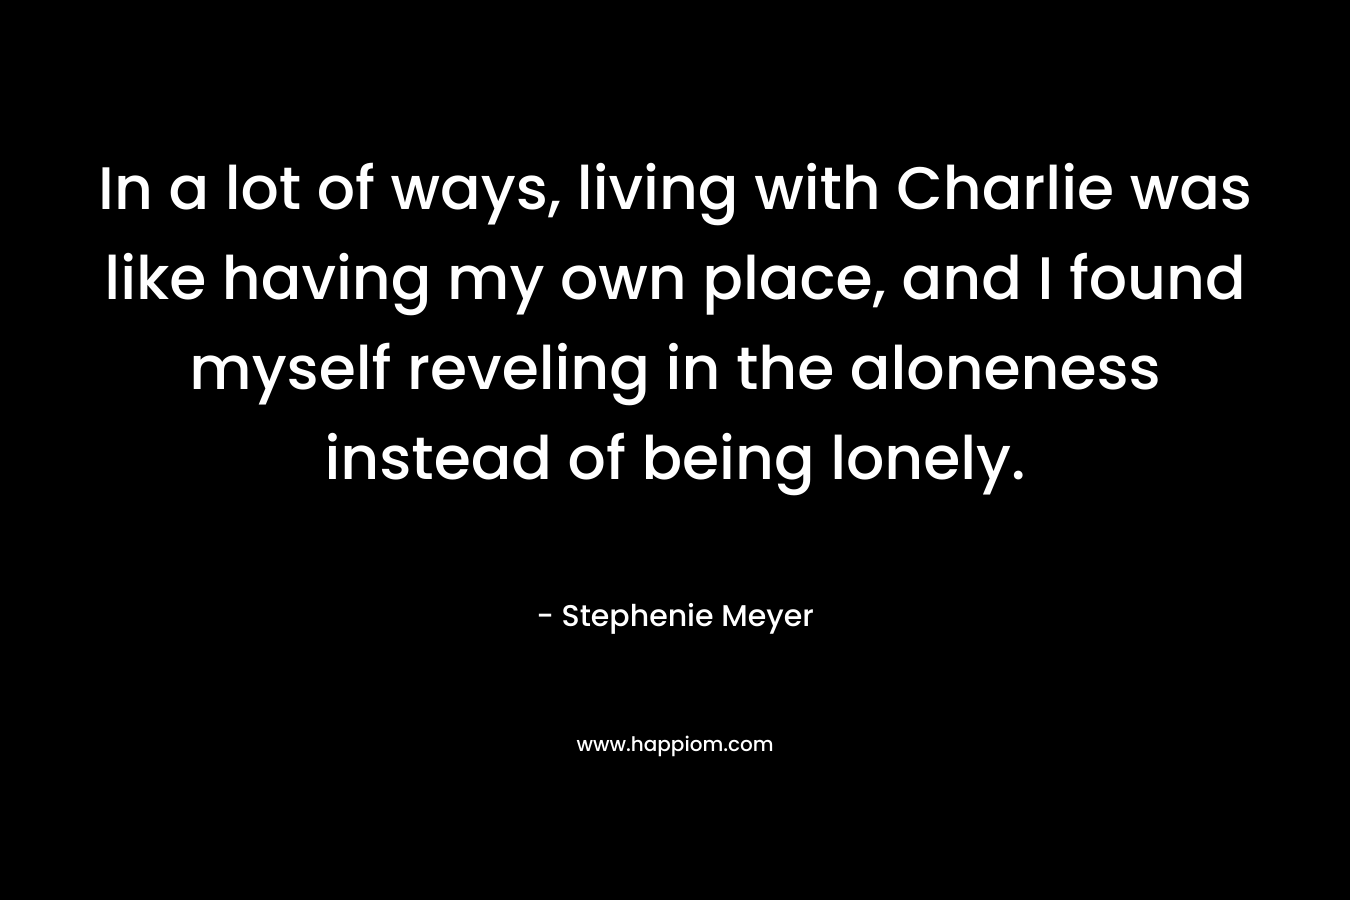 In a lot of ways, living with Charlie was like having my own place, and I found myself reveling in the aloneness instead of being lonely.